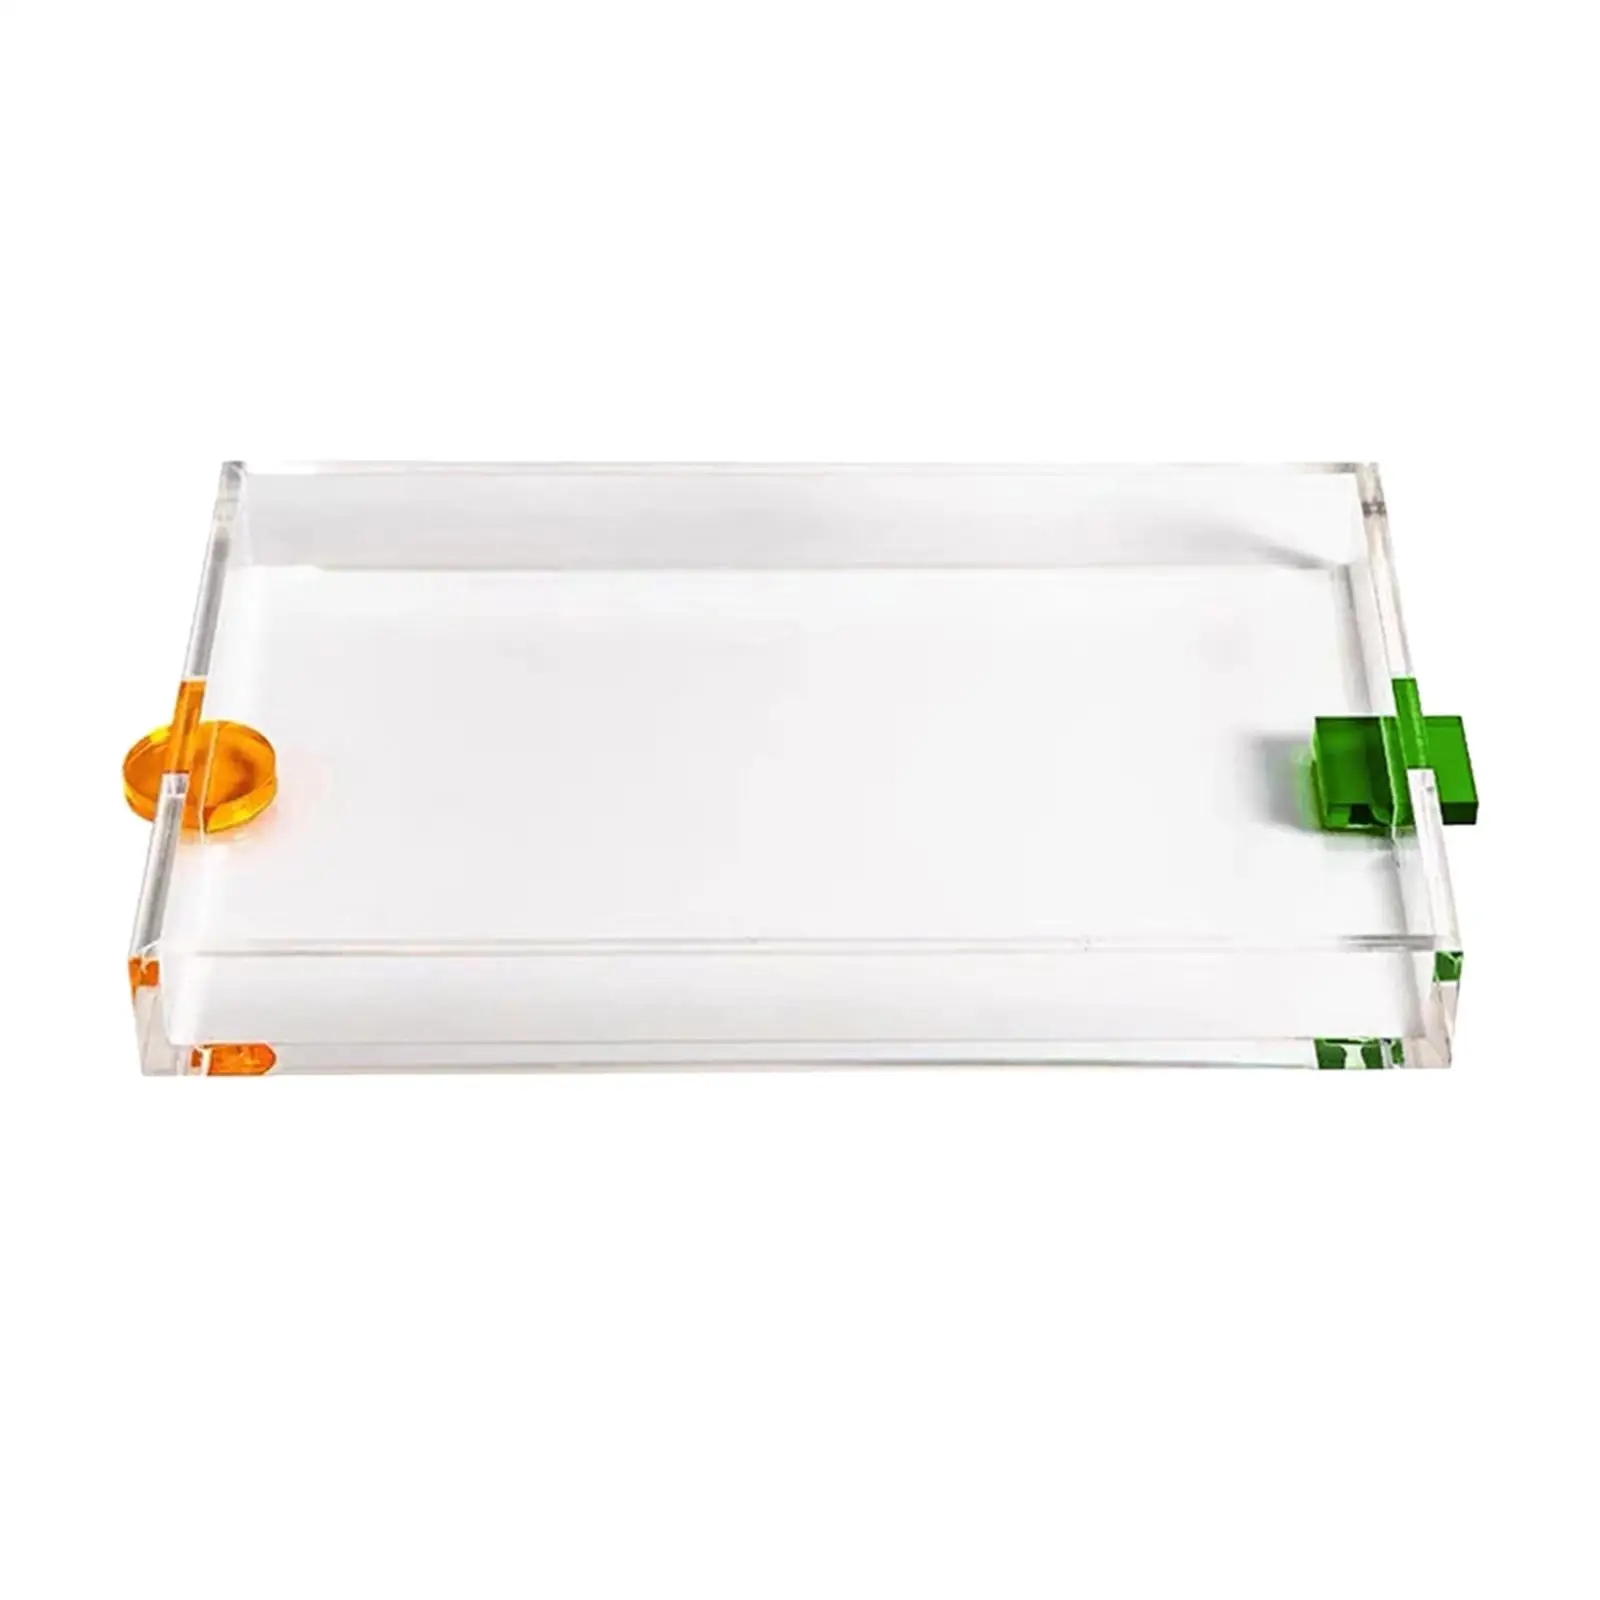 Acrylic Serving Tray Platter Eating Tray Stylish Photo Prop Sofa Couch Tray